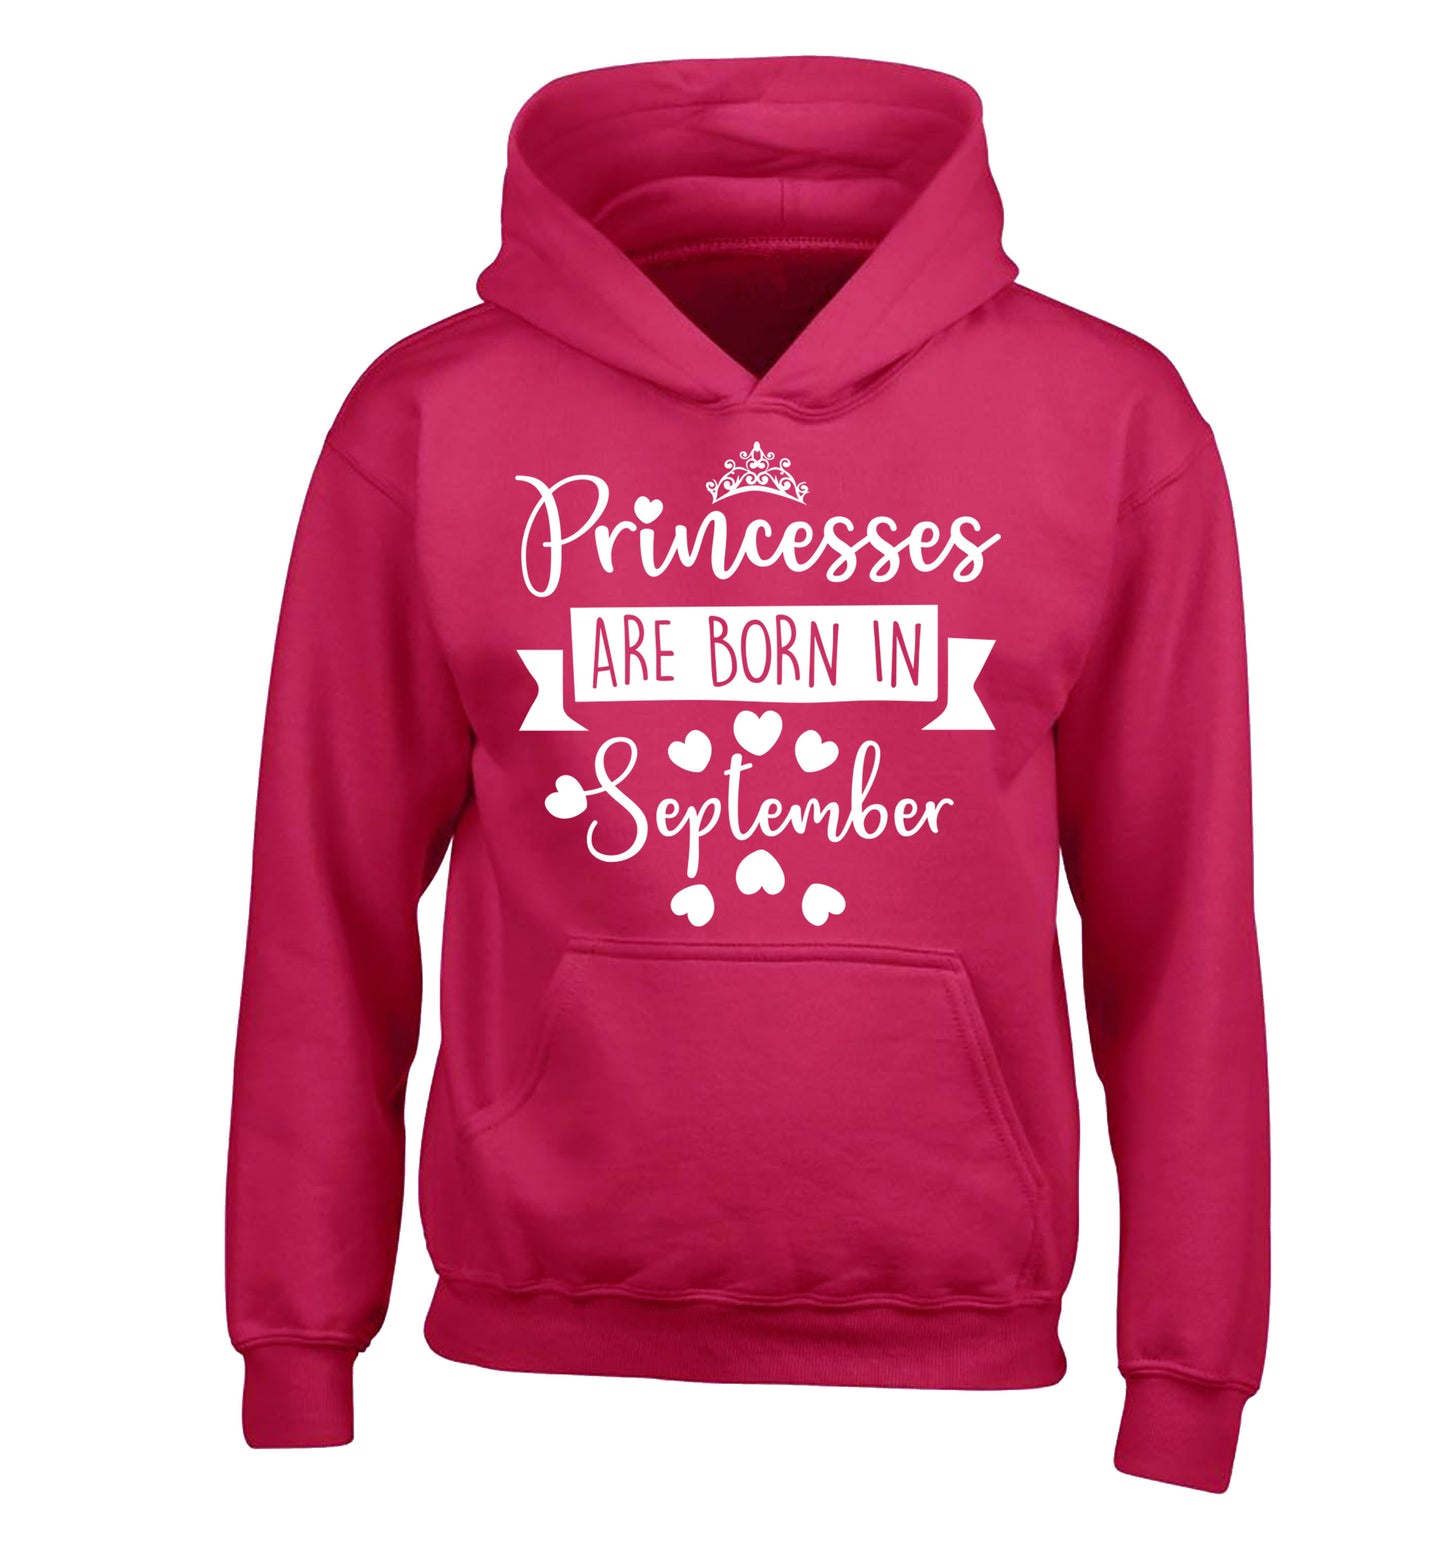 Princesses are born in September children's pink hoodie 12-13 Years